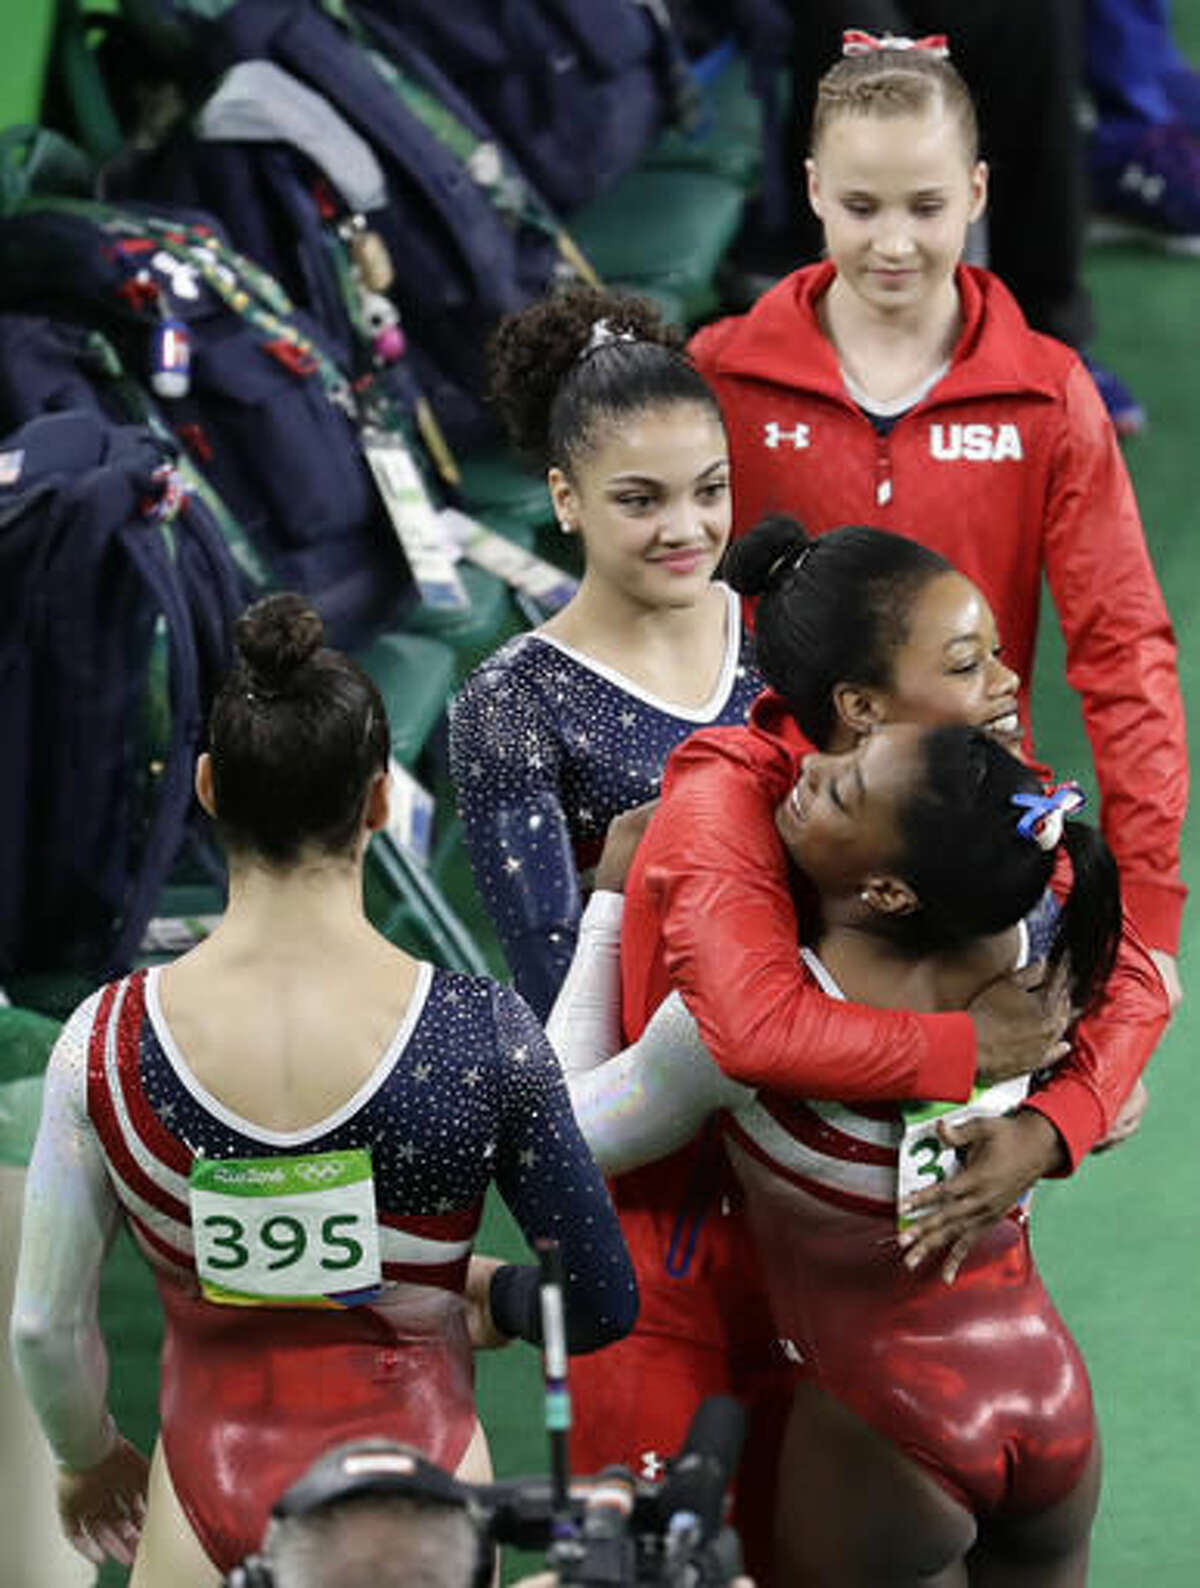 United States' Gabrielle Douglas, facing camera, hugs teammate Simone Biles after her performance on the vault during the artistic gymnastics women's team final at the 2016 Summer Olympics in Rio de Janeiro, Brazil, Tuesday, Aug. 9, 2016. (AP Photo/Dmitri Lovetsky)